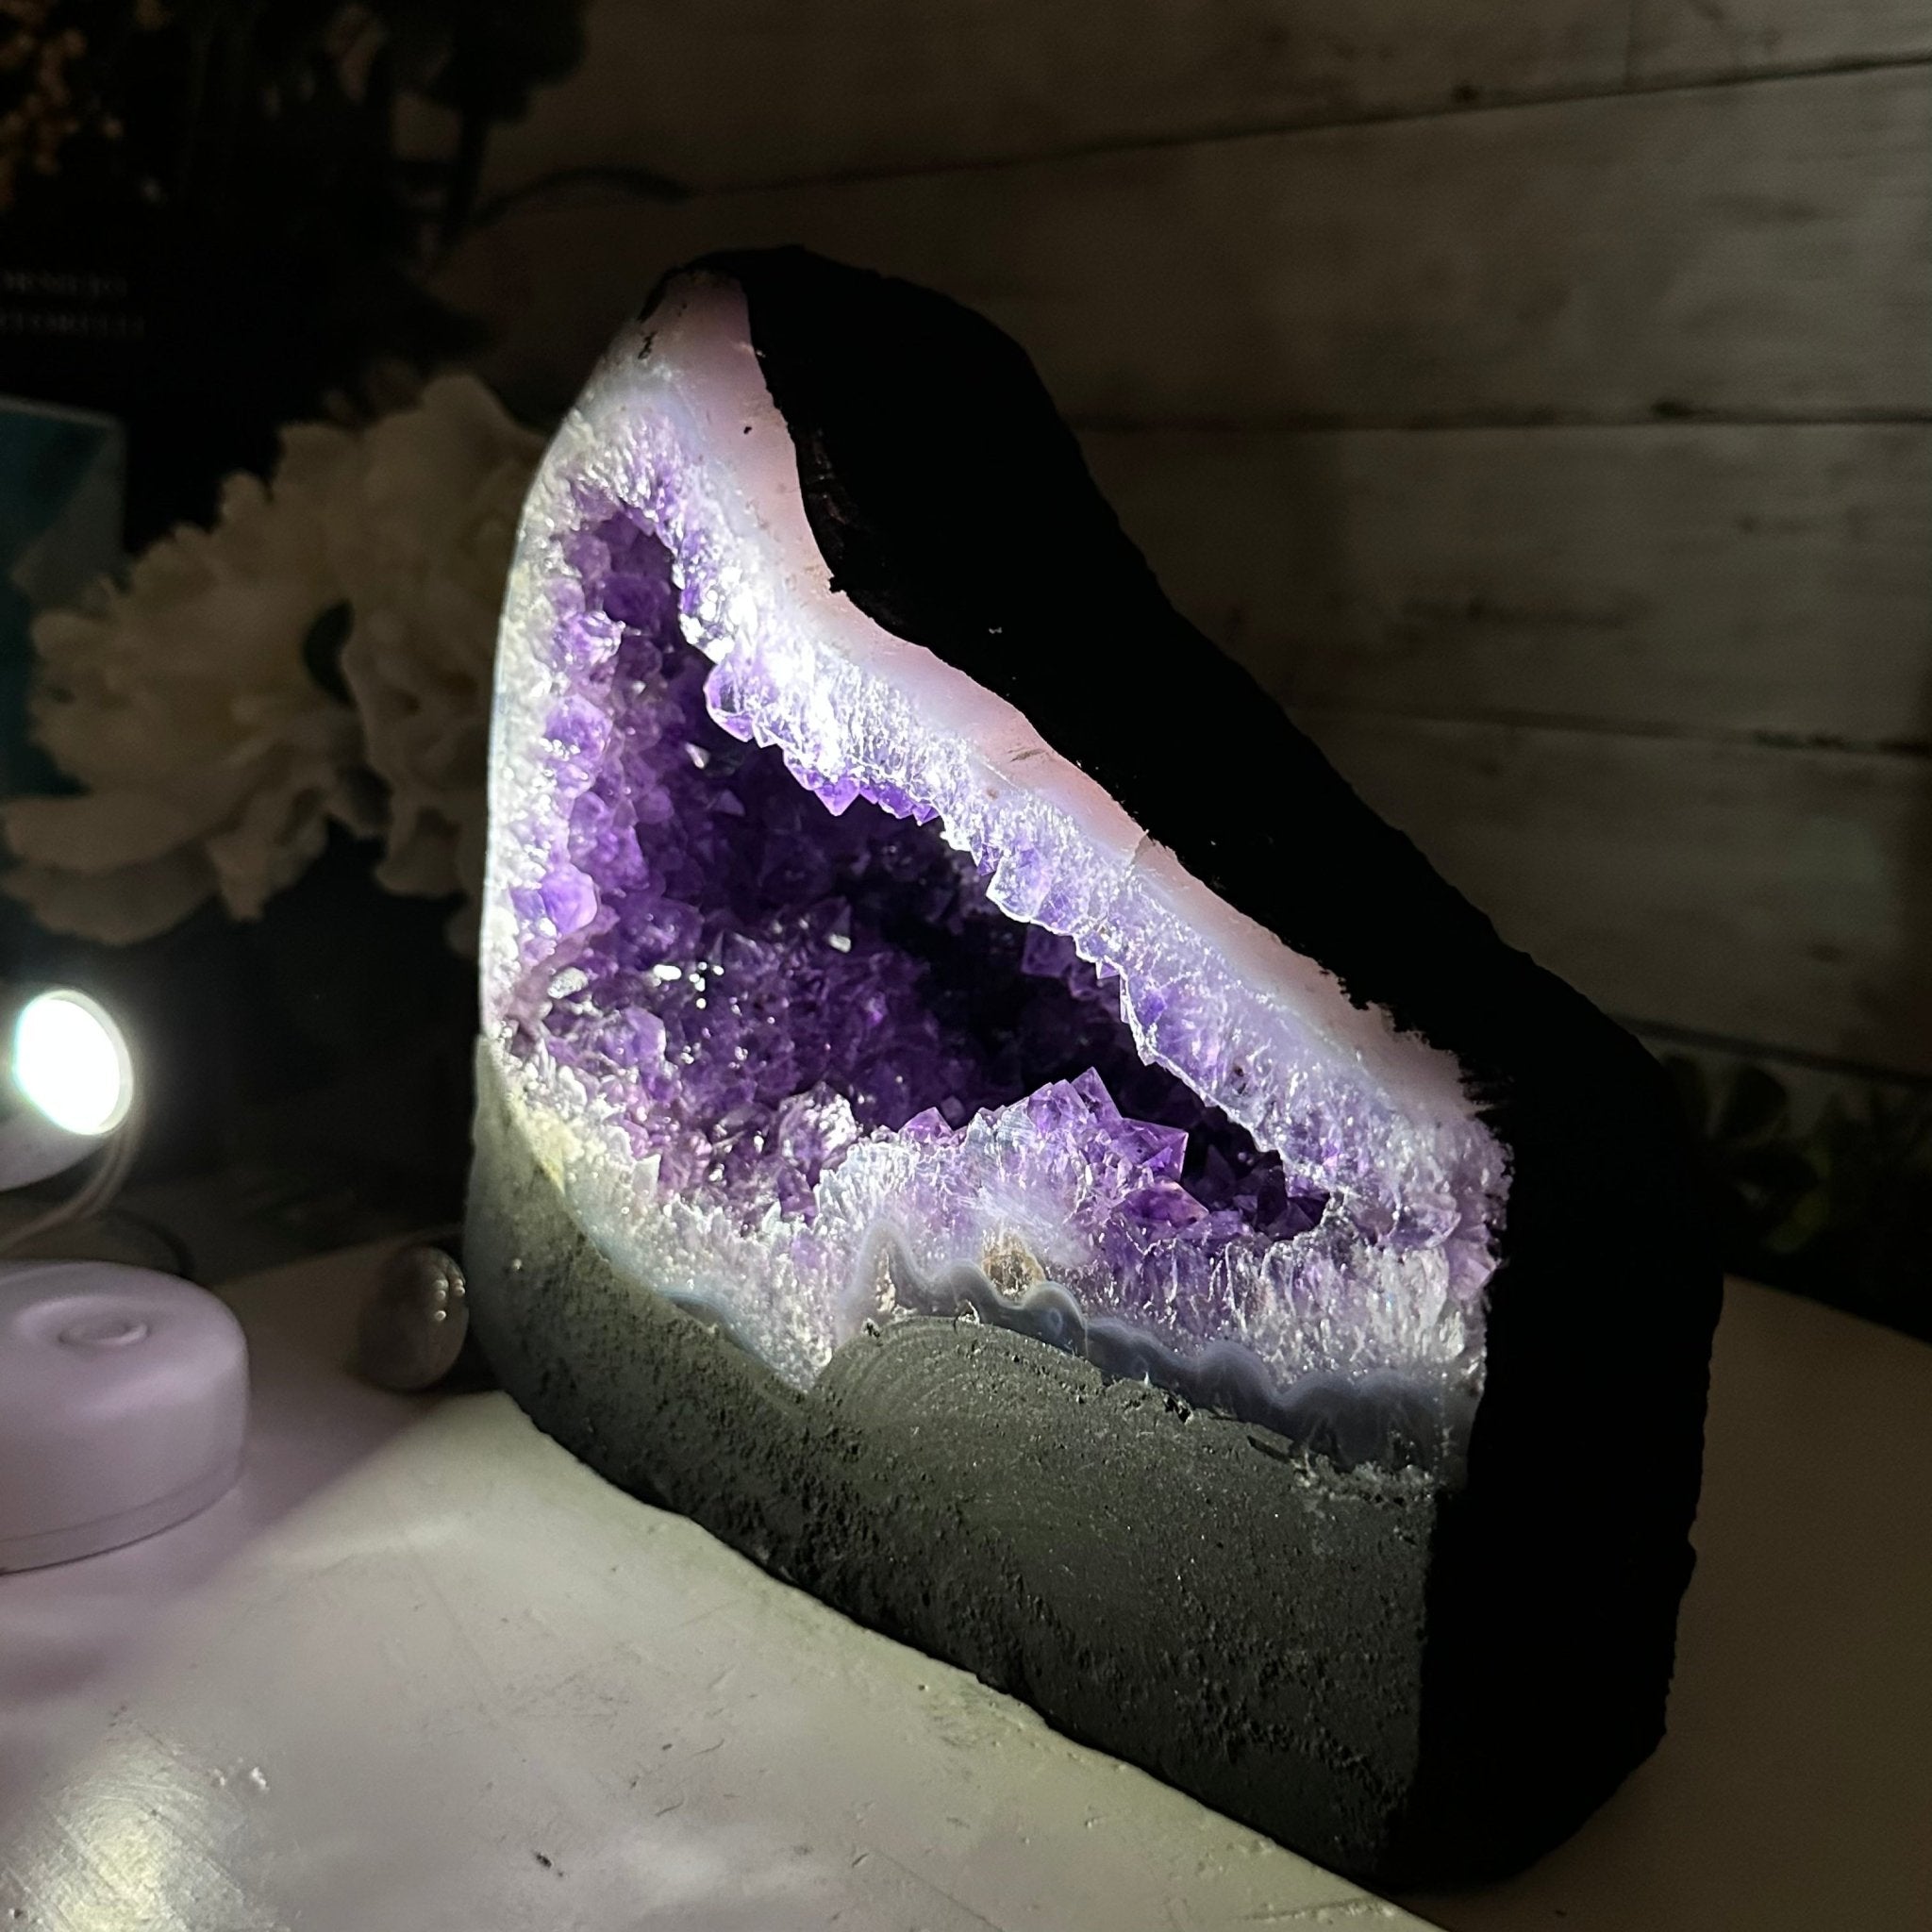 Extra Plus Quality Brazilian Amethyst Cathedral, 10.5 lbs & 7.2" Tall, Model #5601-0957 by Brazil Gems - Brazil GemsBrazil GemsExtra Plus Quality Brazilian Amethyst Cathedral, 10.5 lbs & 7.2" Tall, Model #5601-0957 by Brazil GemsCathedrals5601-0957